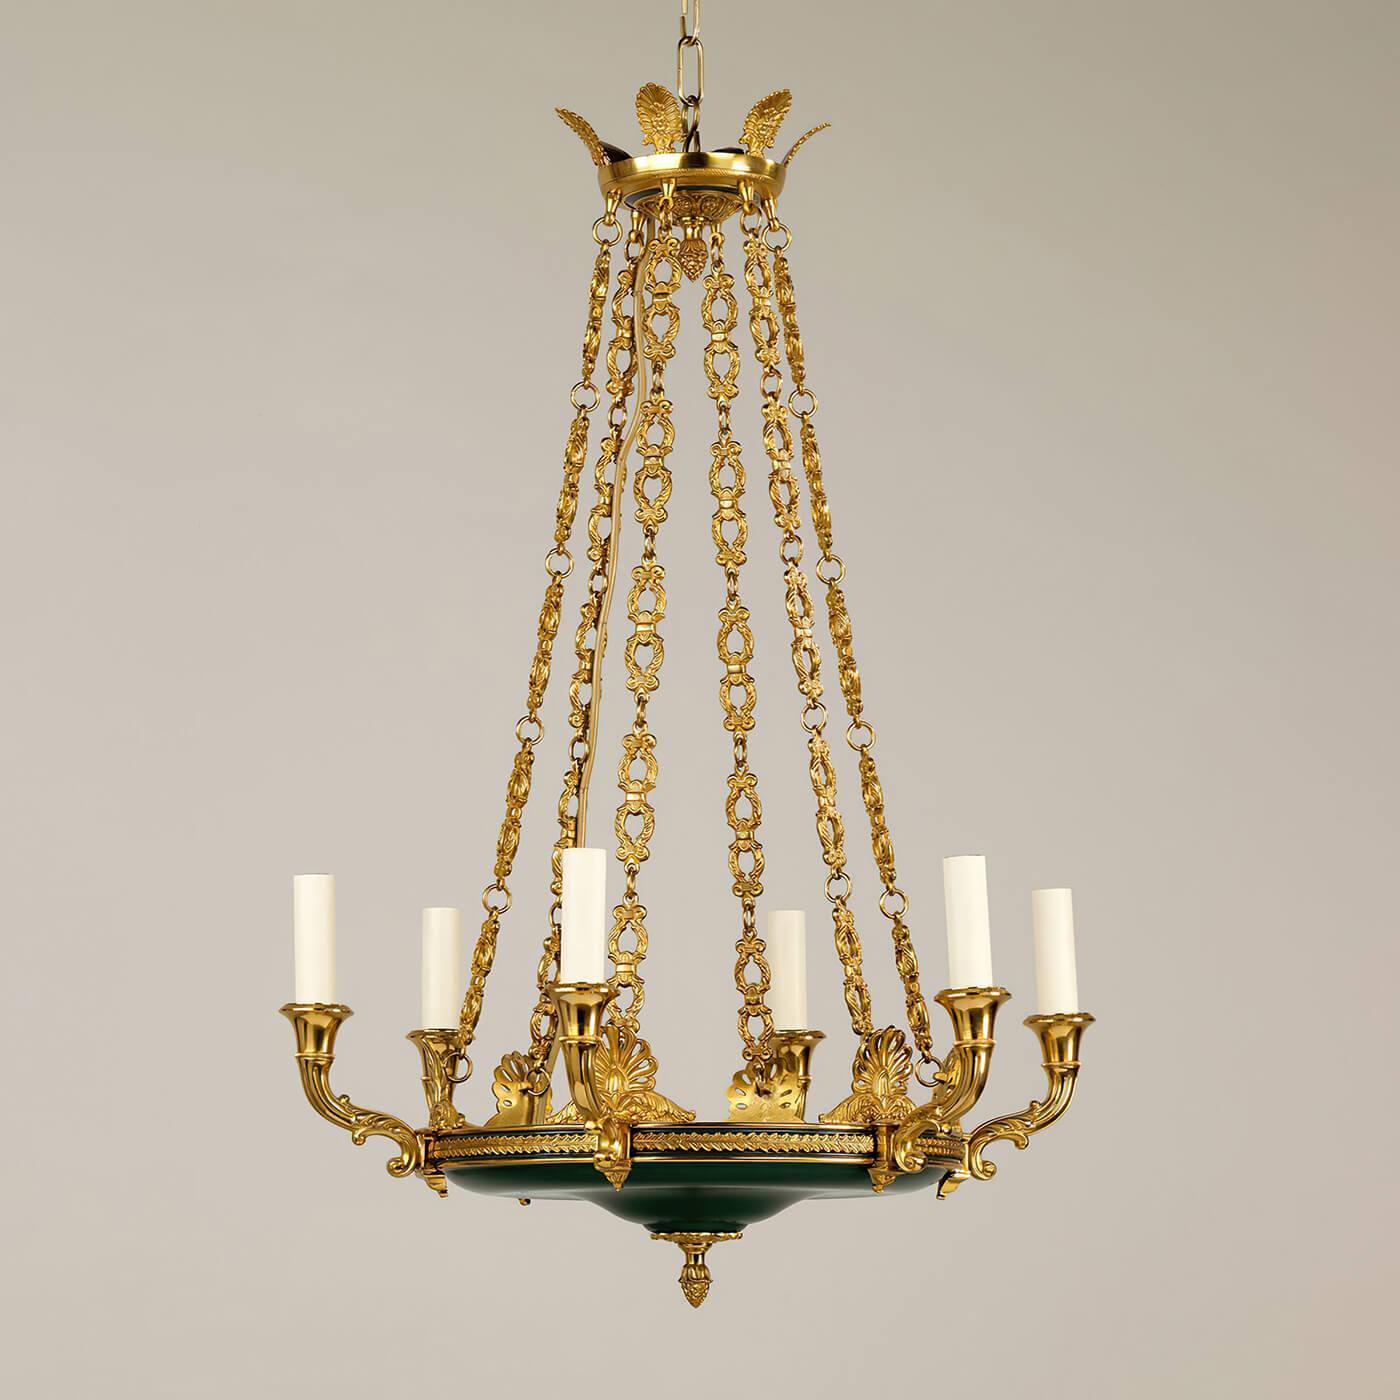 Francois Empire six-light chandelier, the ornate decoration on the arms, and the arrangement of the chains demonstrate exceptional casting in brass. With beautifully cast floral details of acanthus and palmettes, with acorn finials and a green